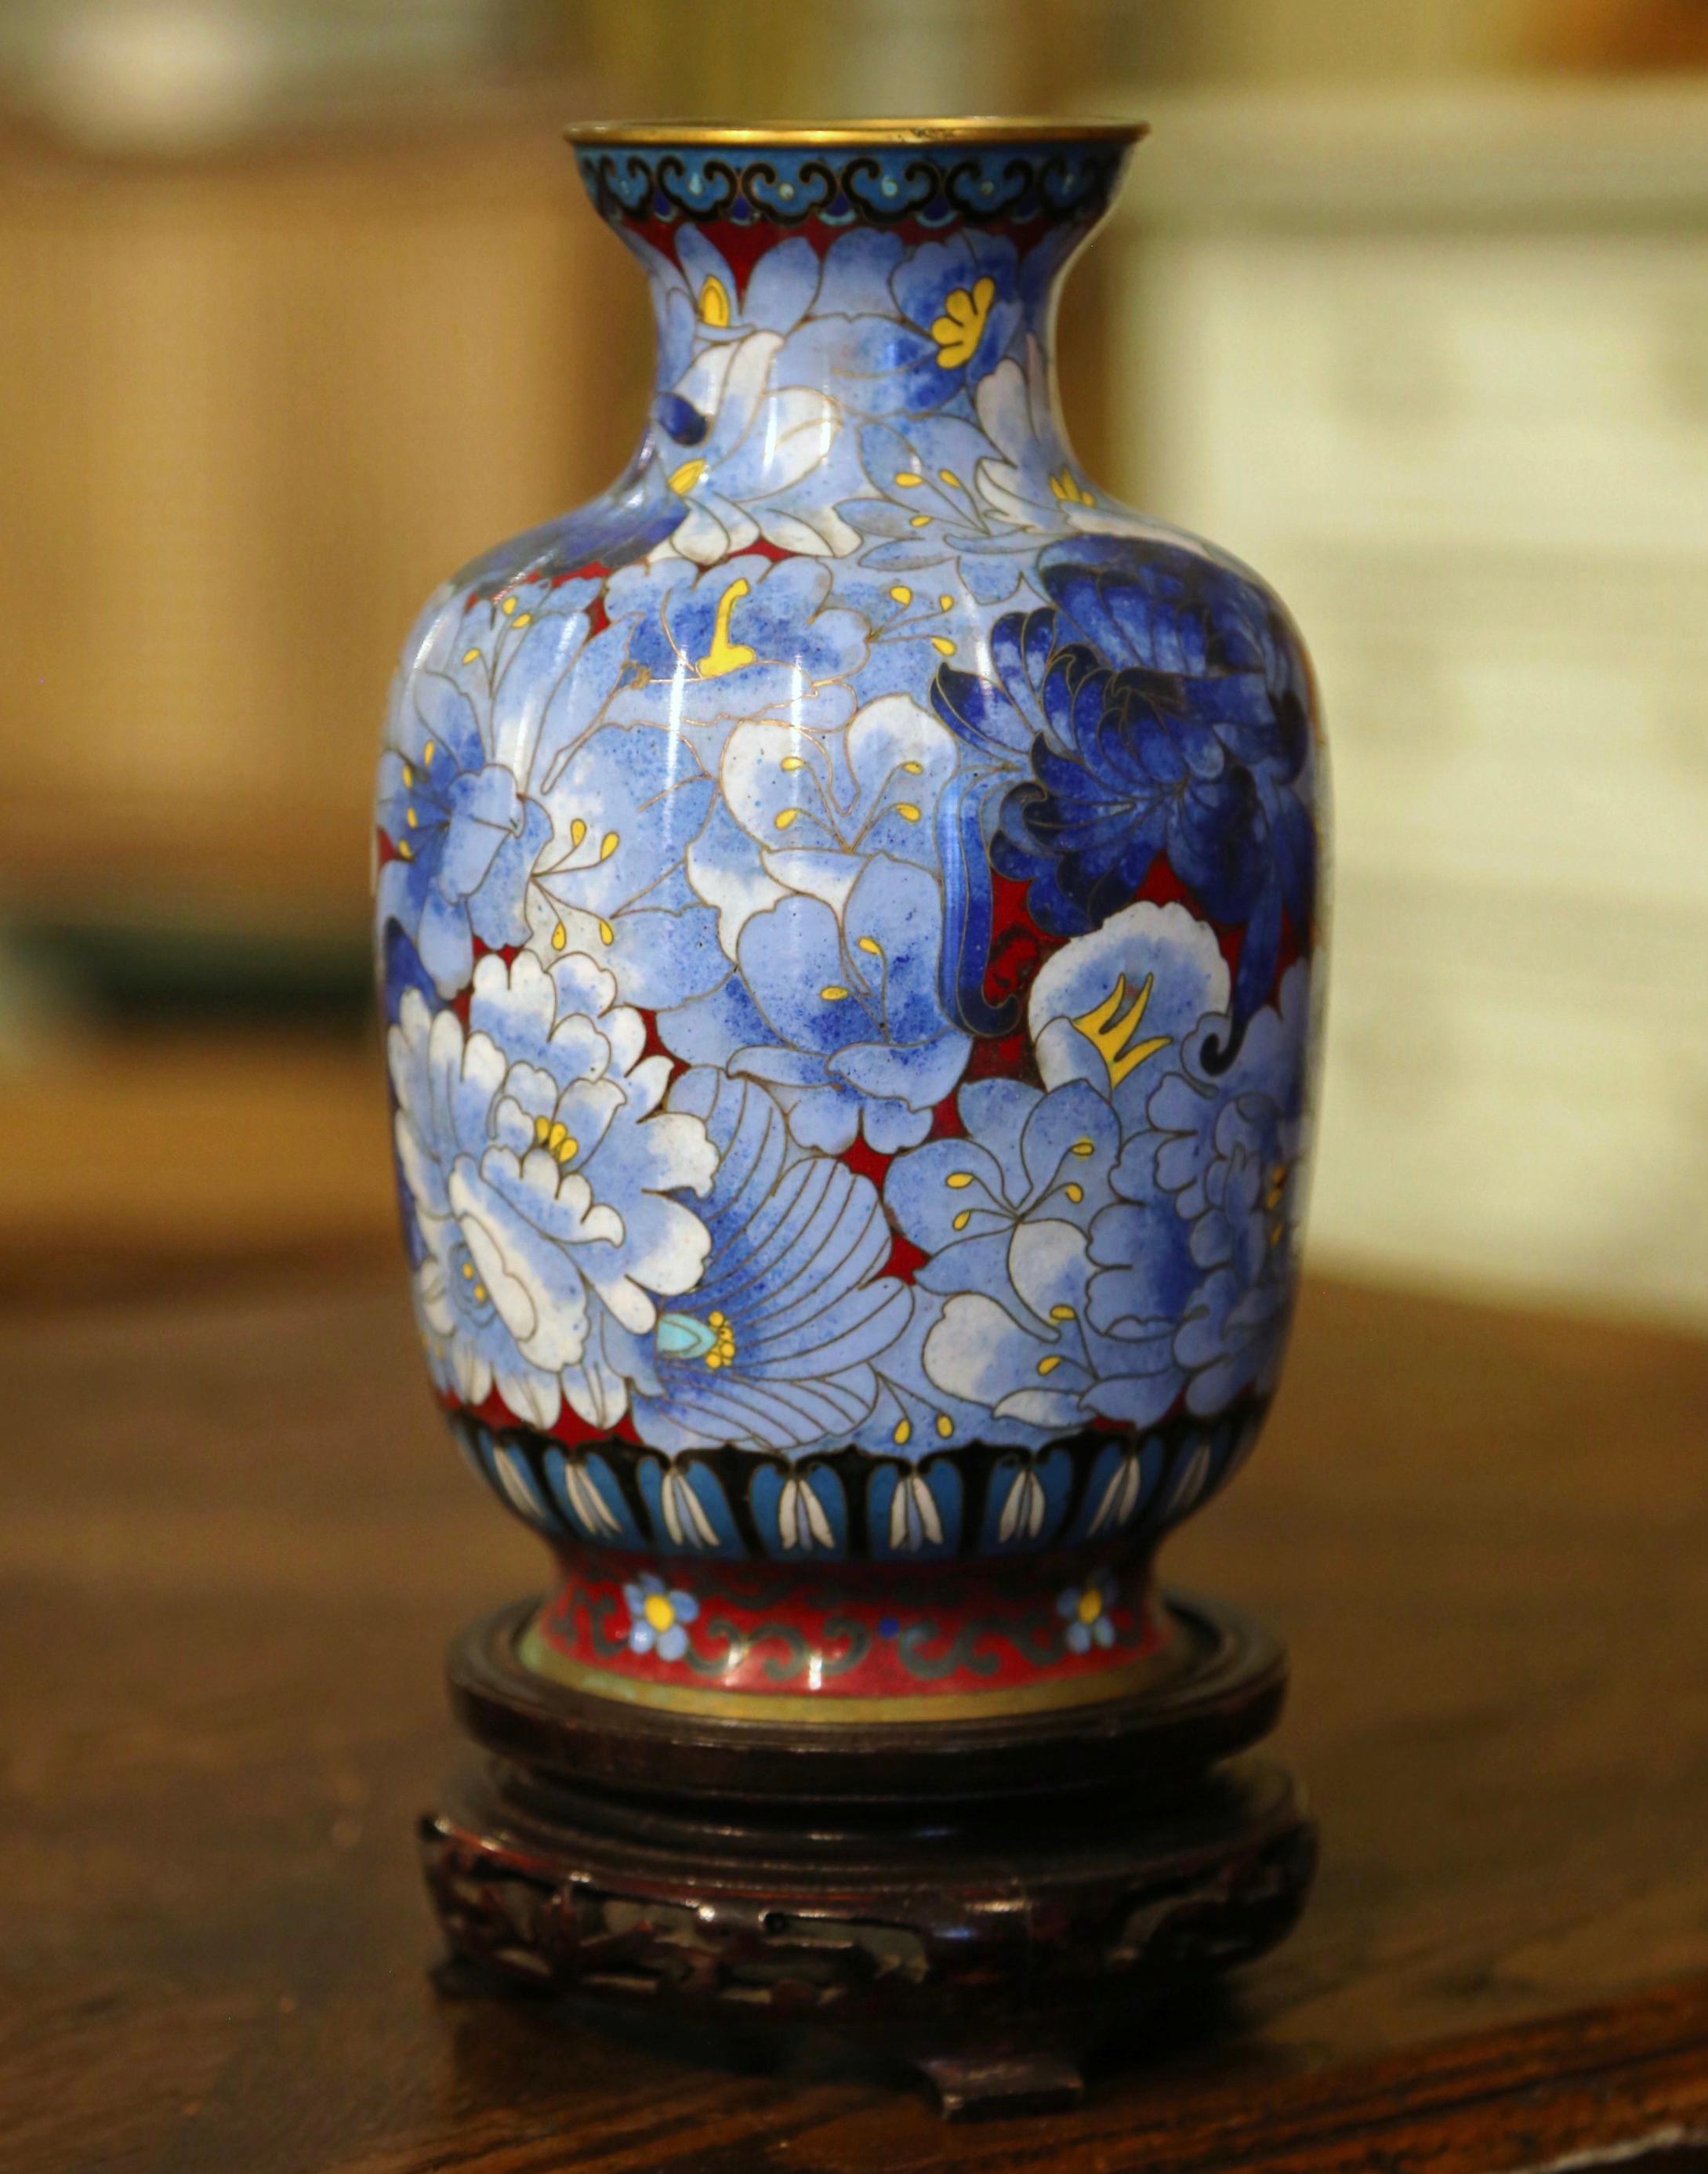 Decorate a table or a buffet with this colorful baluster vase. Created in China circa 1980, the vase features floral motifs in the cloisonné technique (decorative work in which enamel, glass, or gemstones are separated by strips of flattened wire